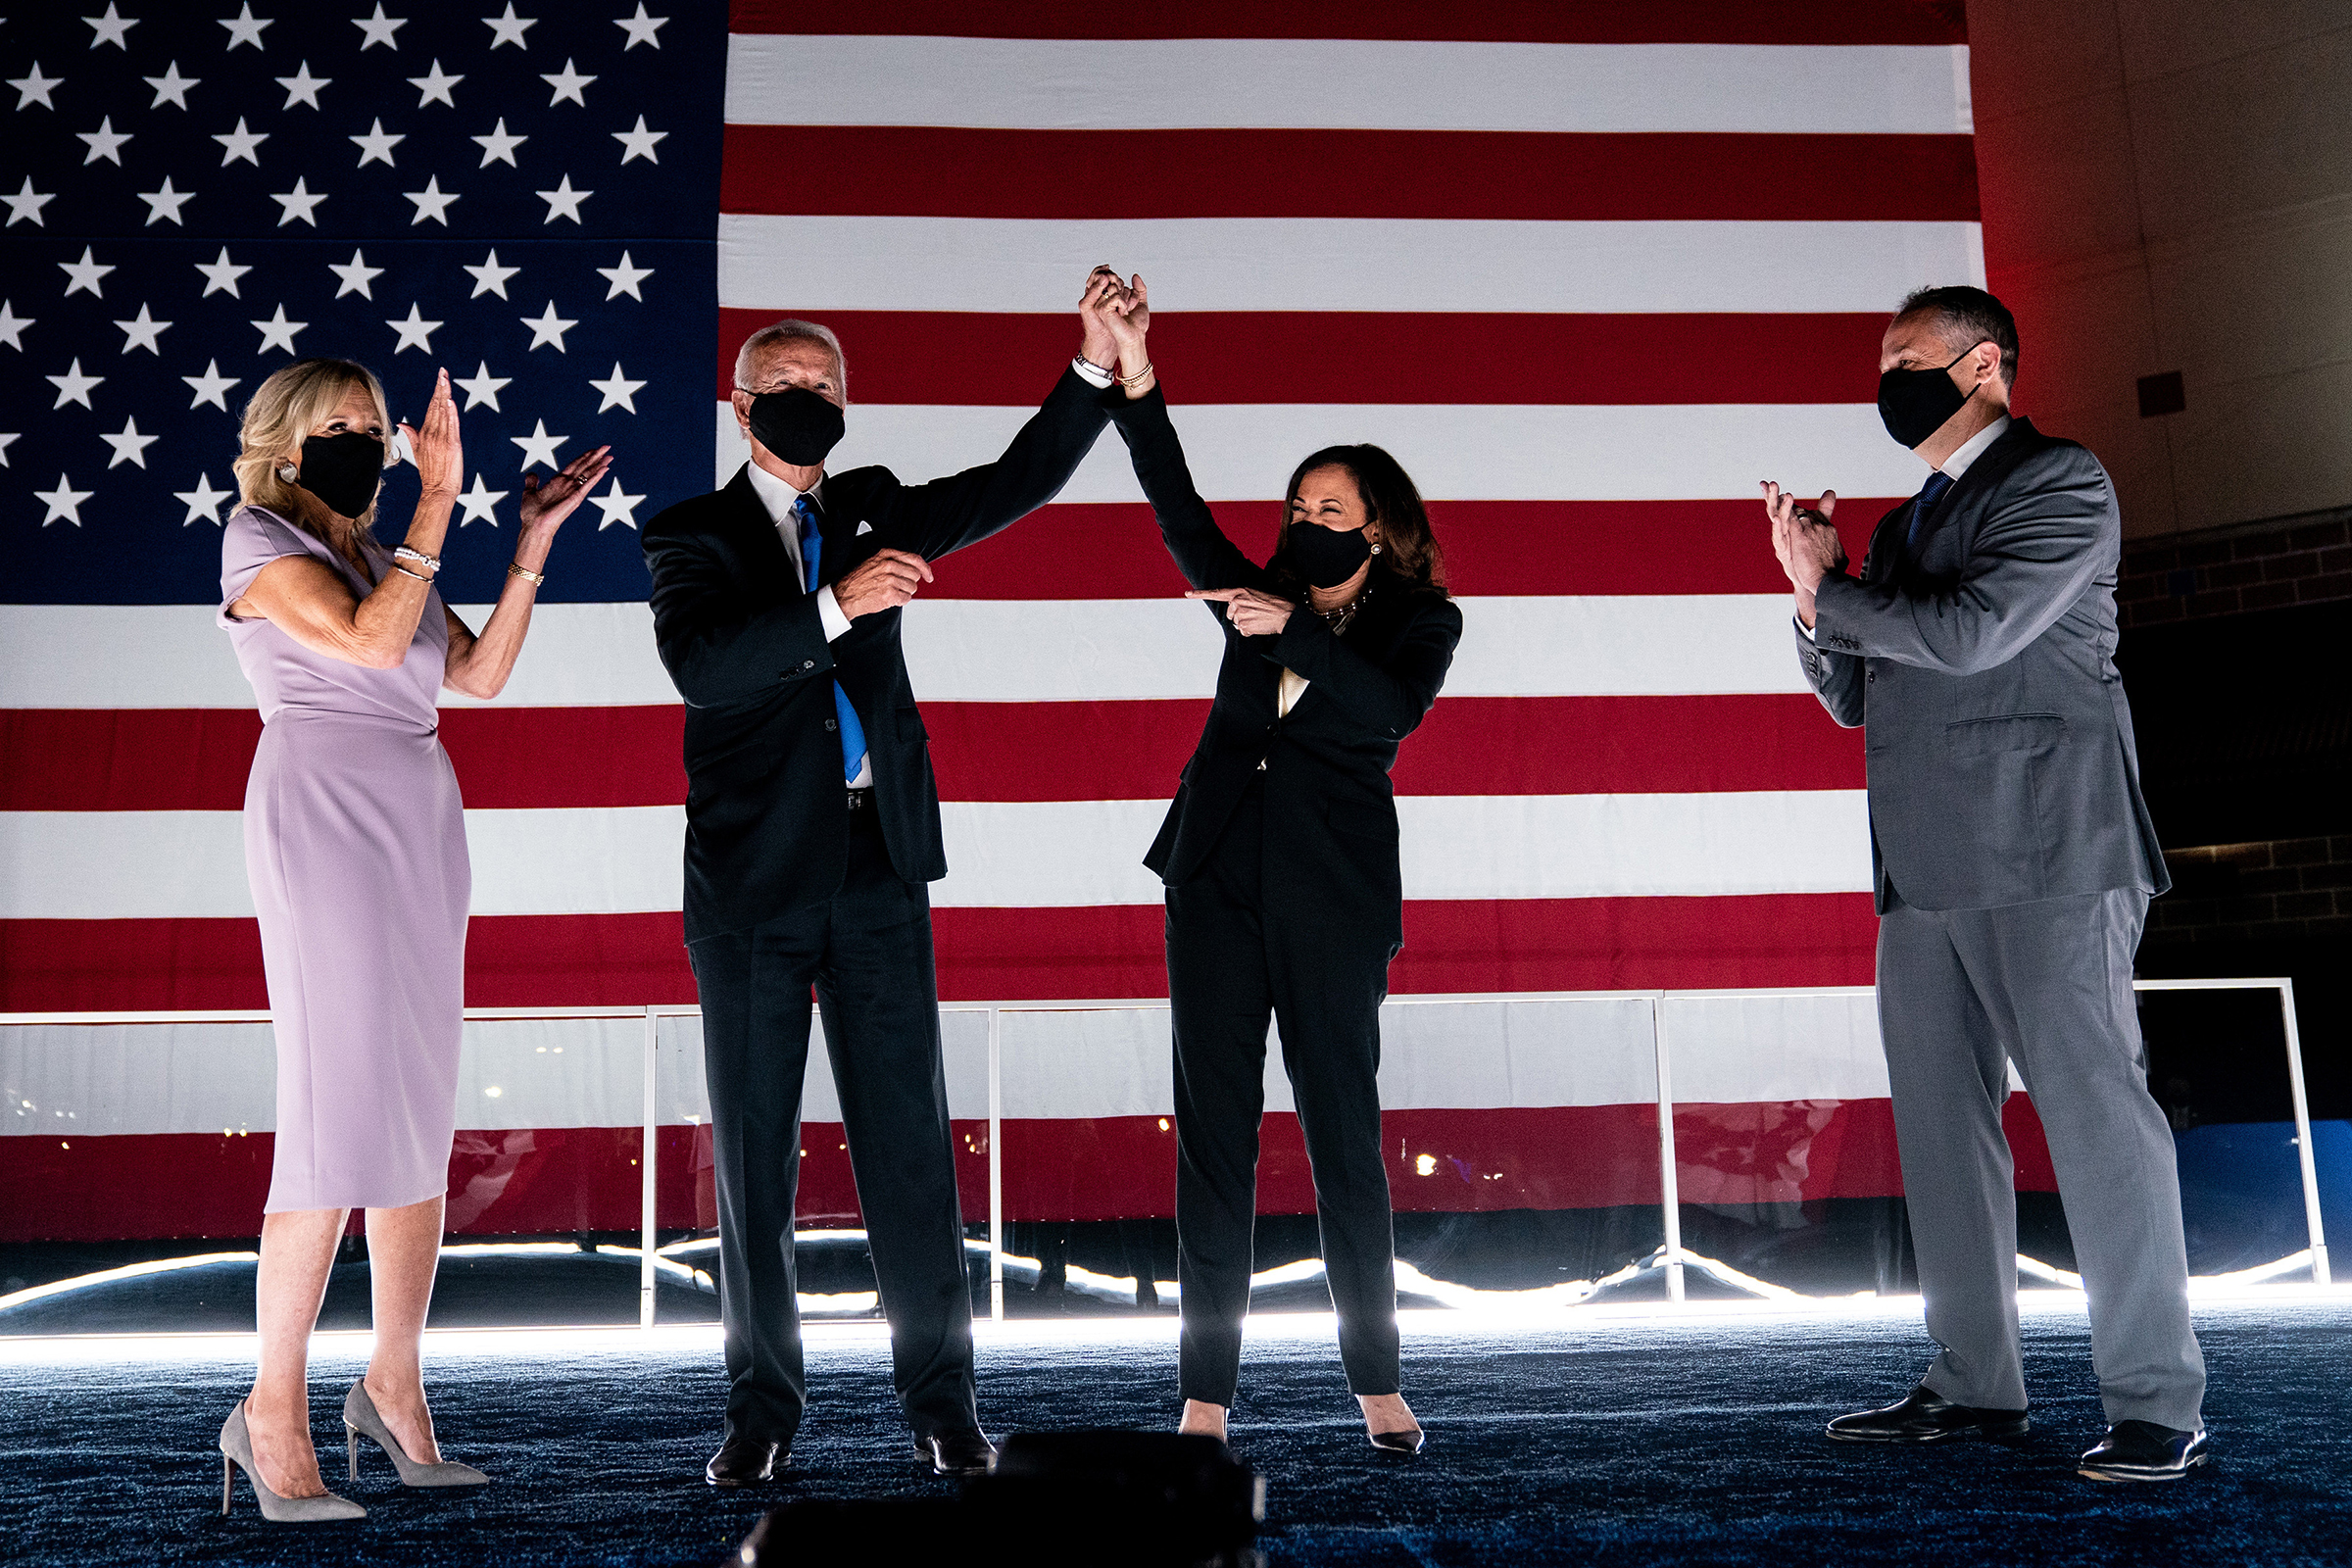 Joe Biden and Sen. Kamala Harris are applauded by their spouses, Jill Biden and Douglas Emhoff, shortly after Biden accepted his party's presidential nomination during the Democratic National Convention in Wilmington, Del., on Aug. 20, 2020.